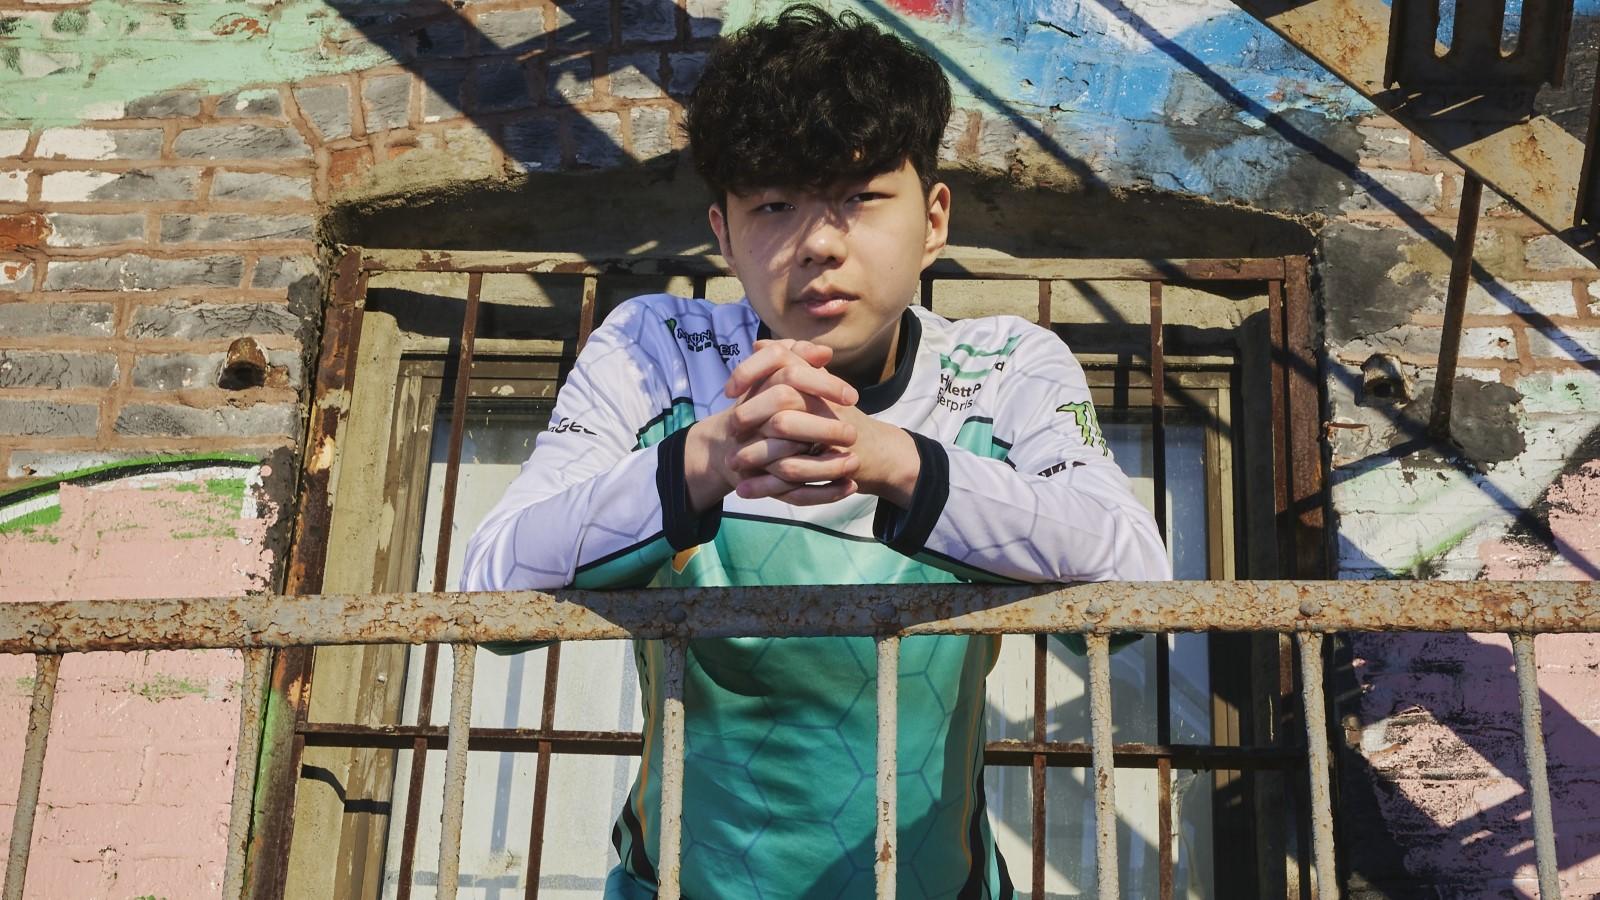 jojopyun declined historic LCK offer to stay in LCS